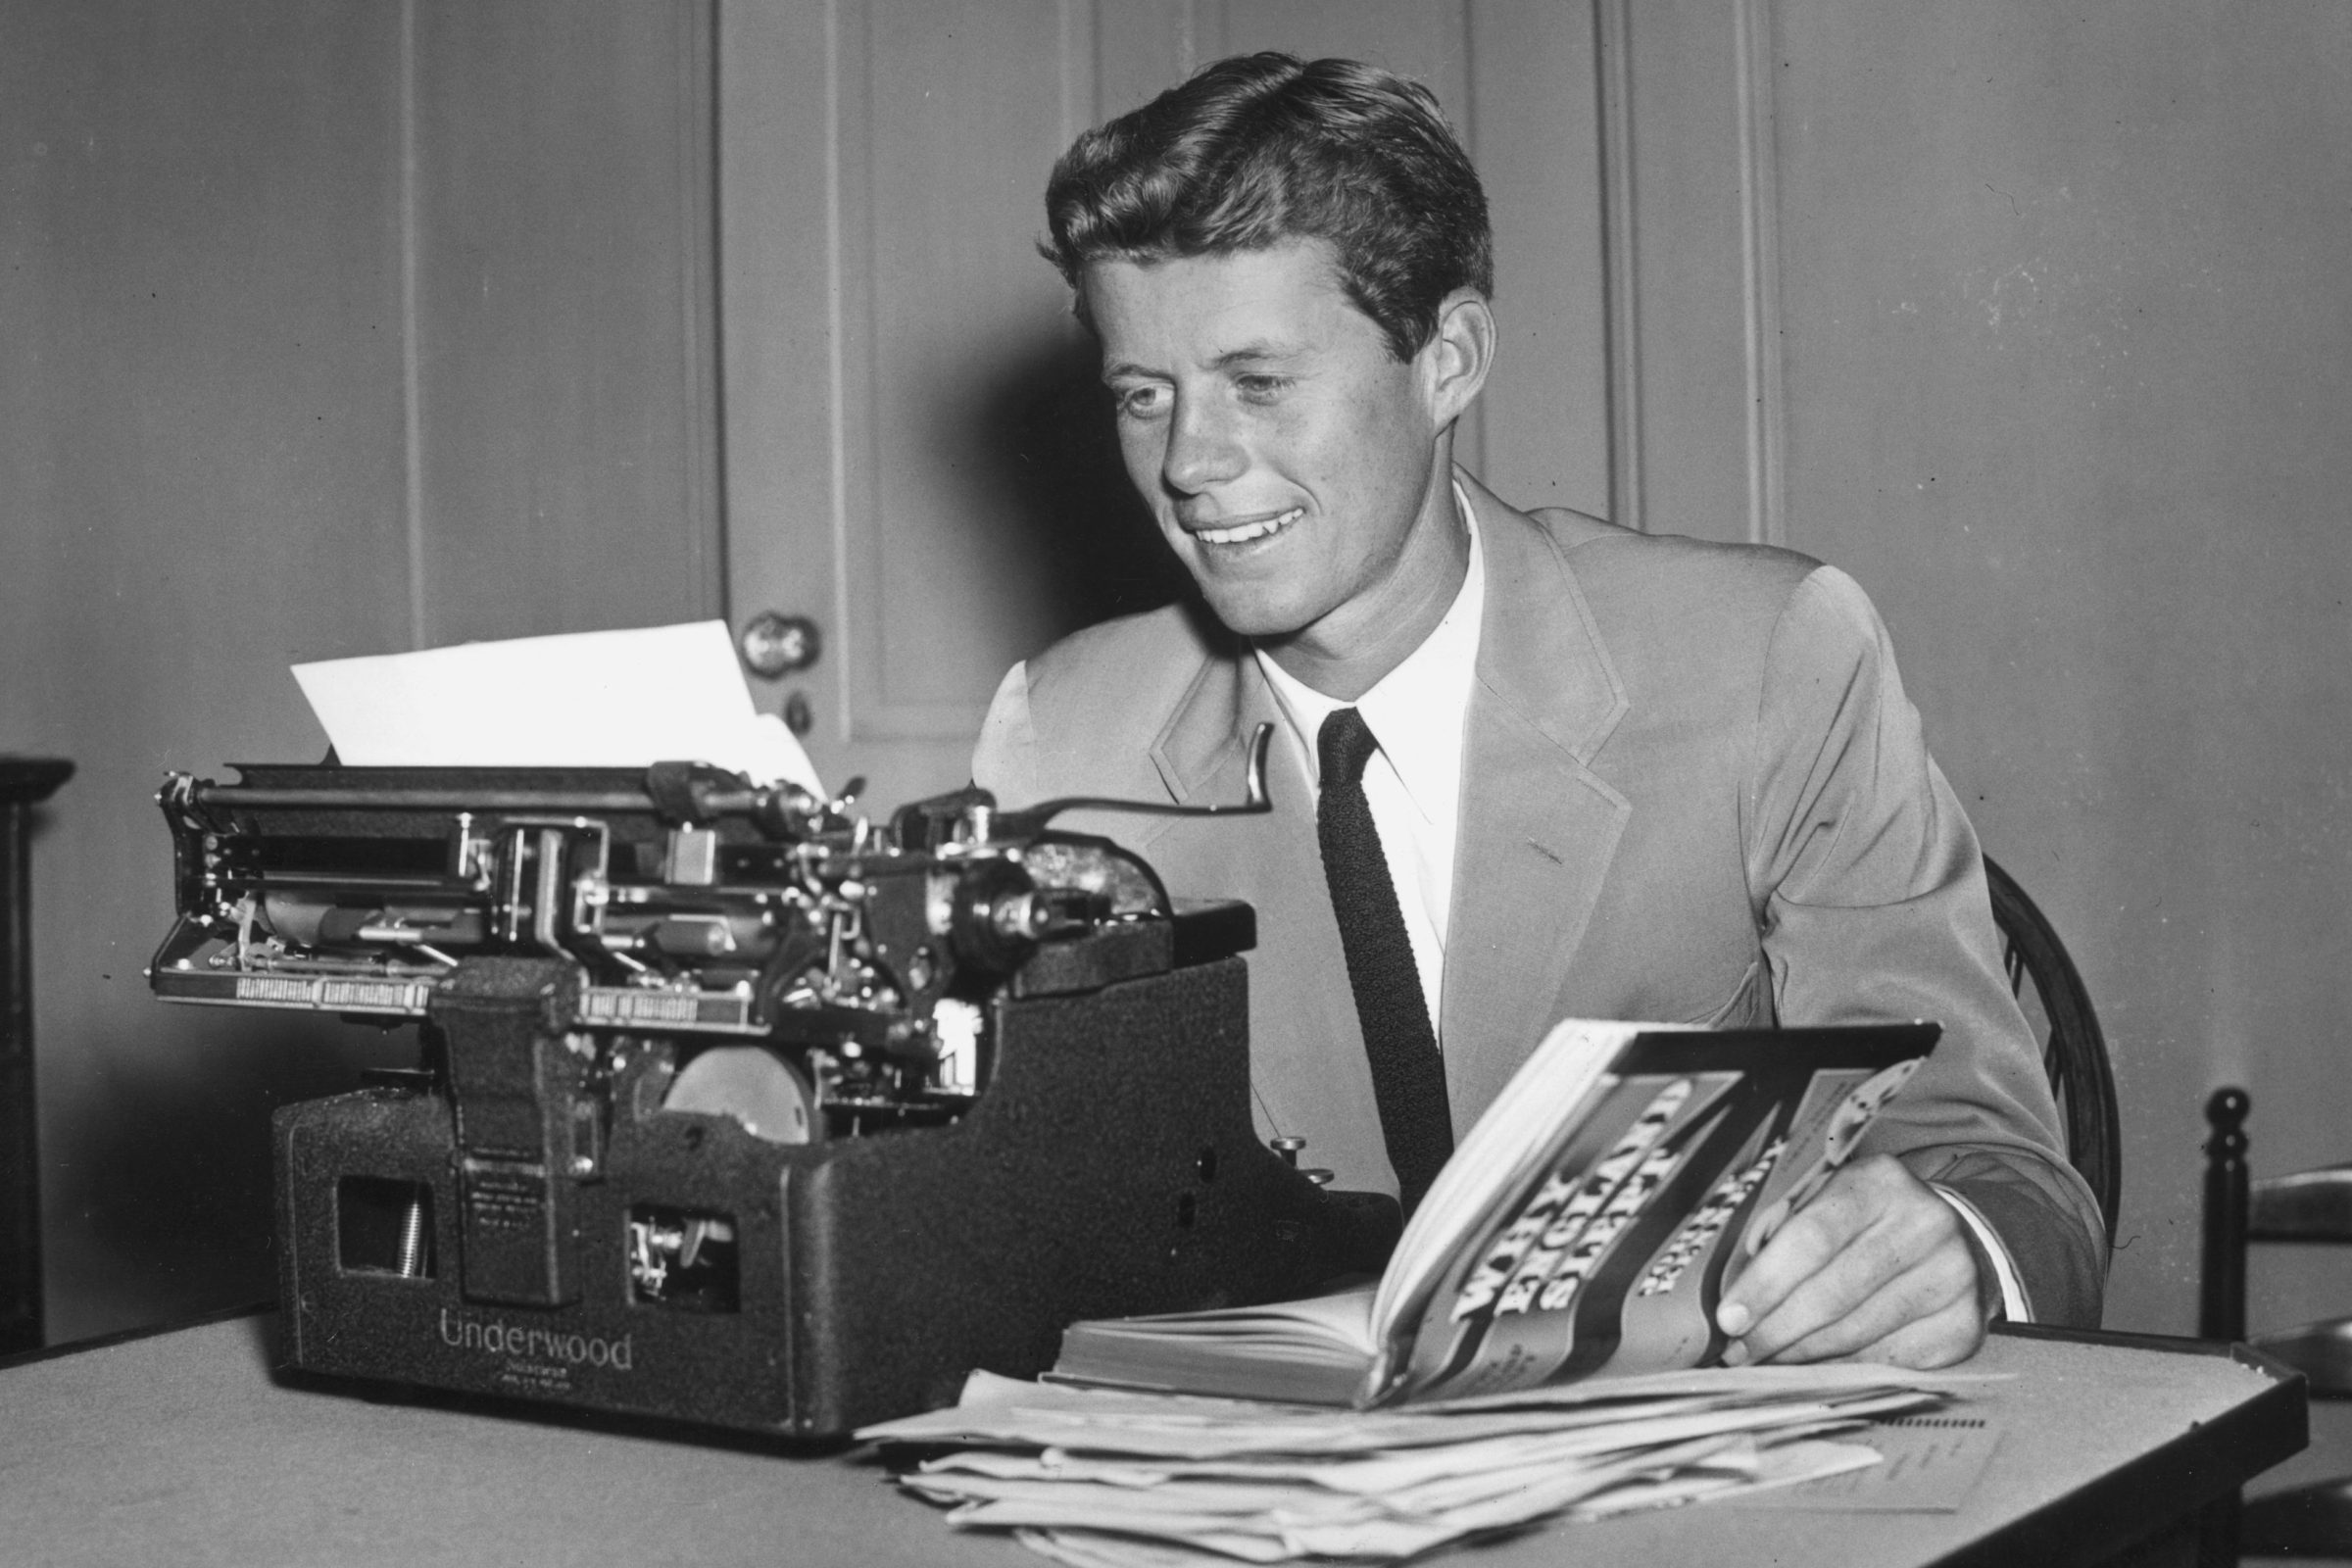 A young John F. Kennedy sits at a typewriter